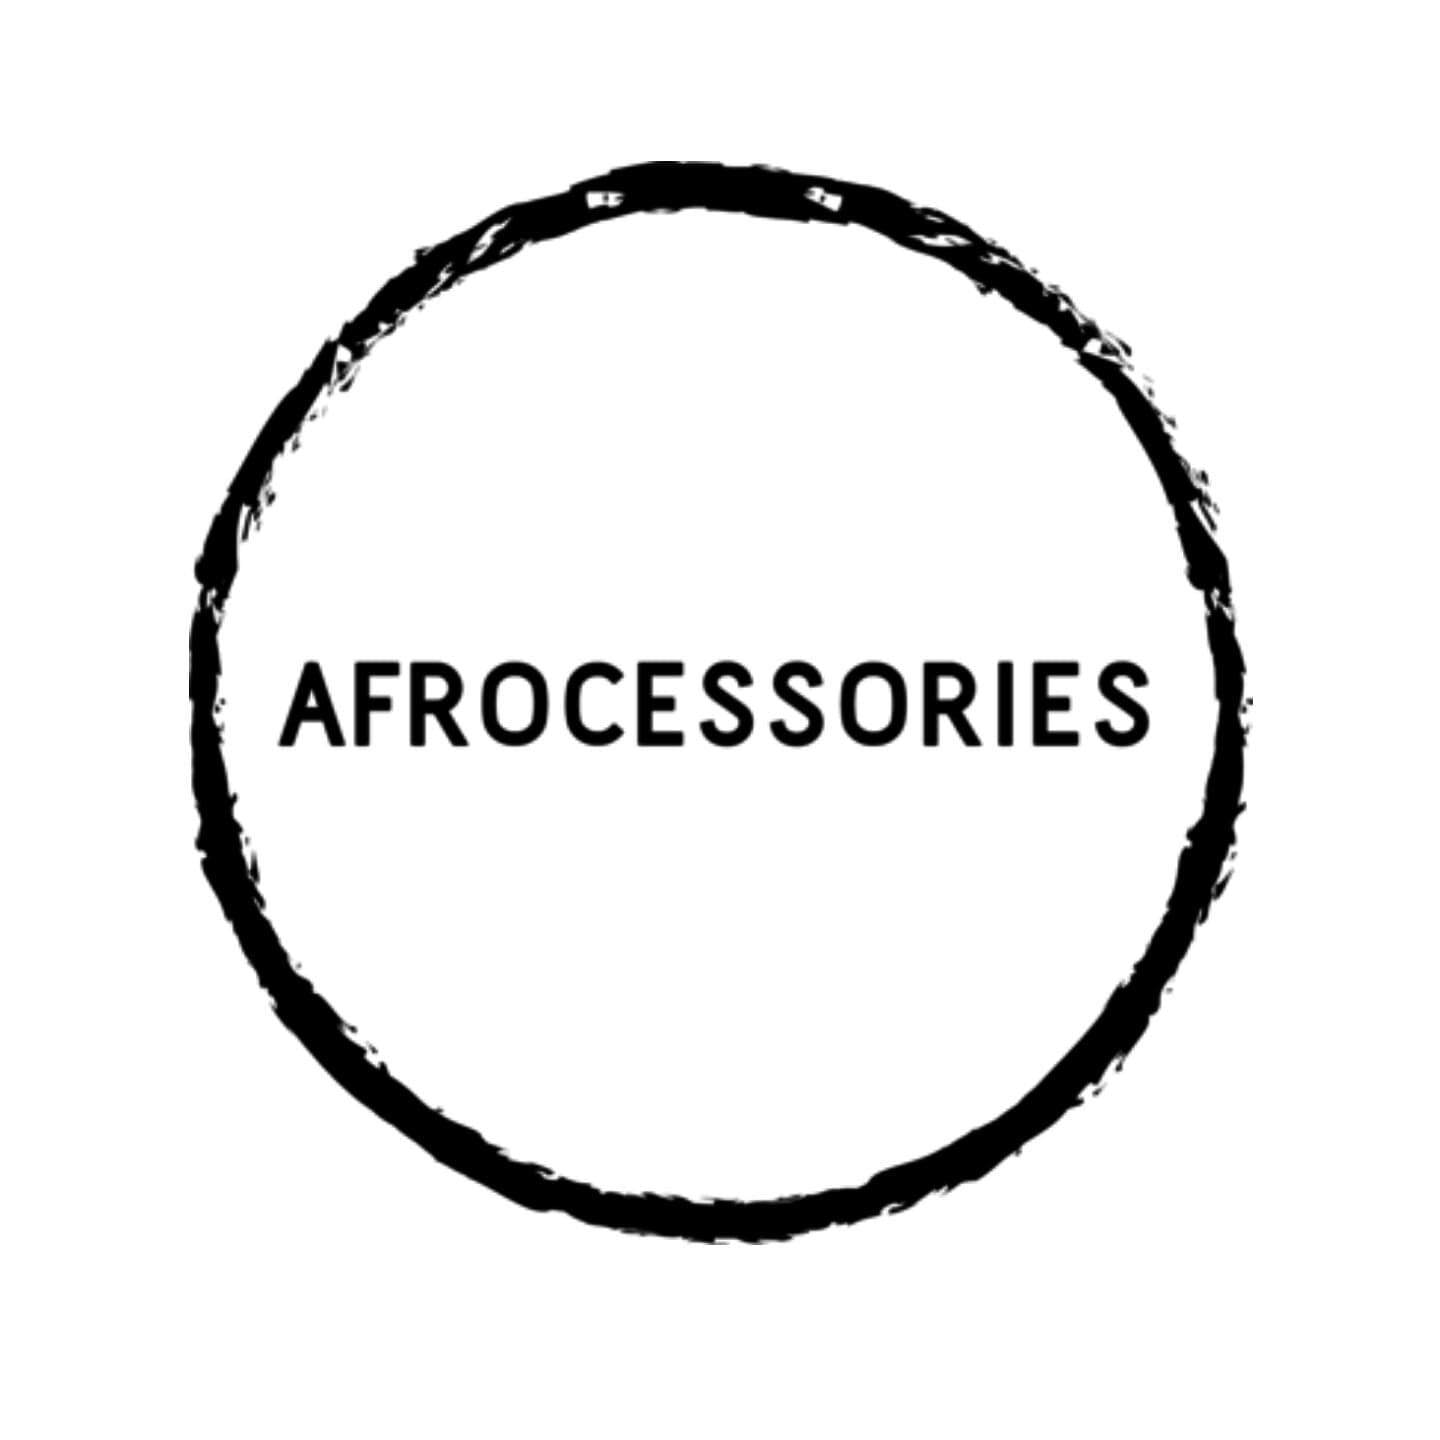 Afrocessories